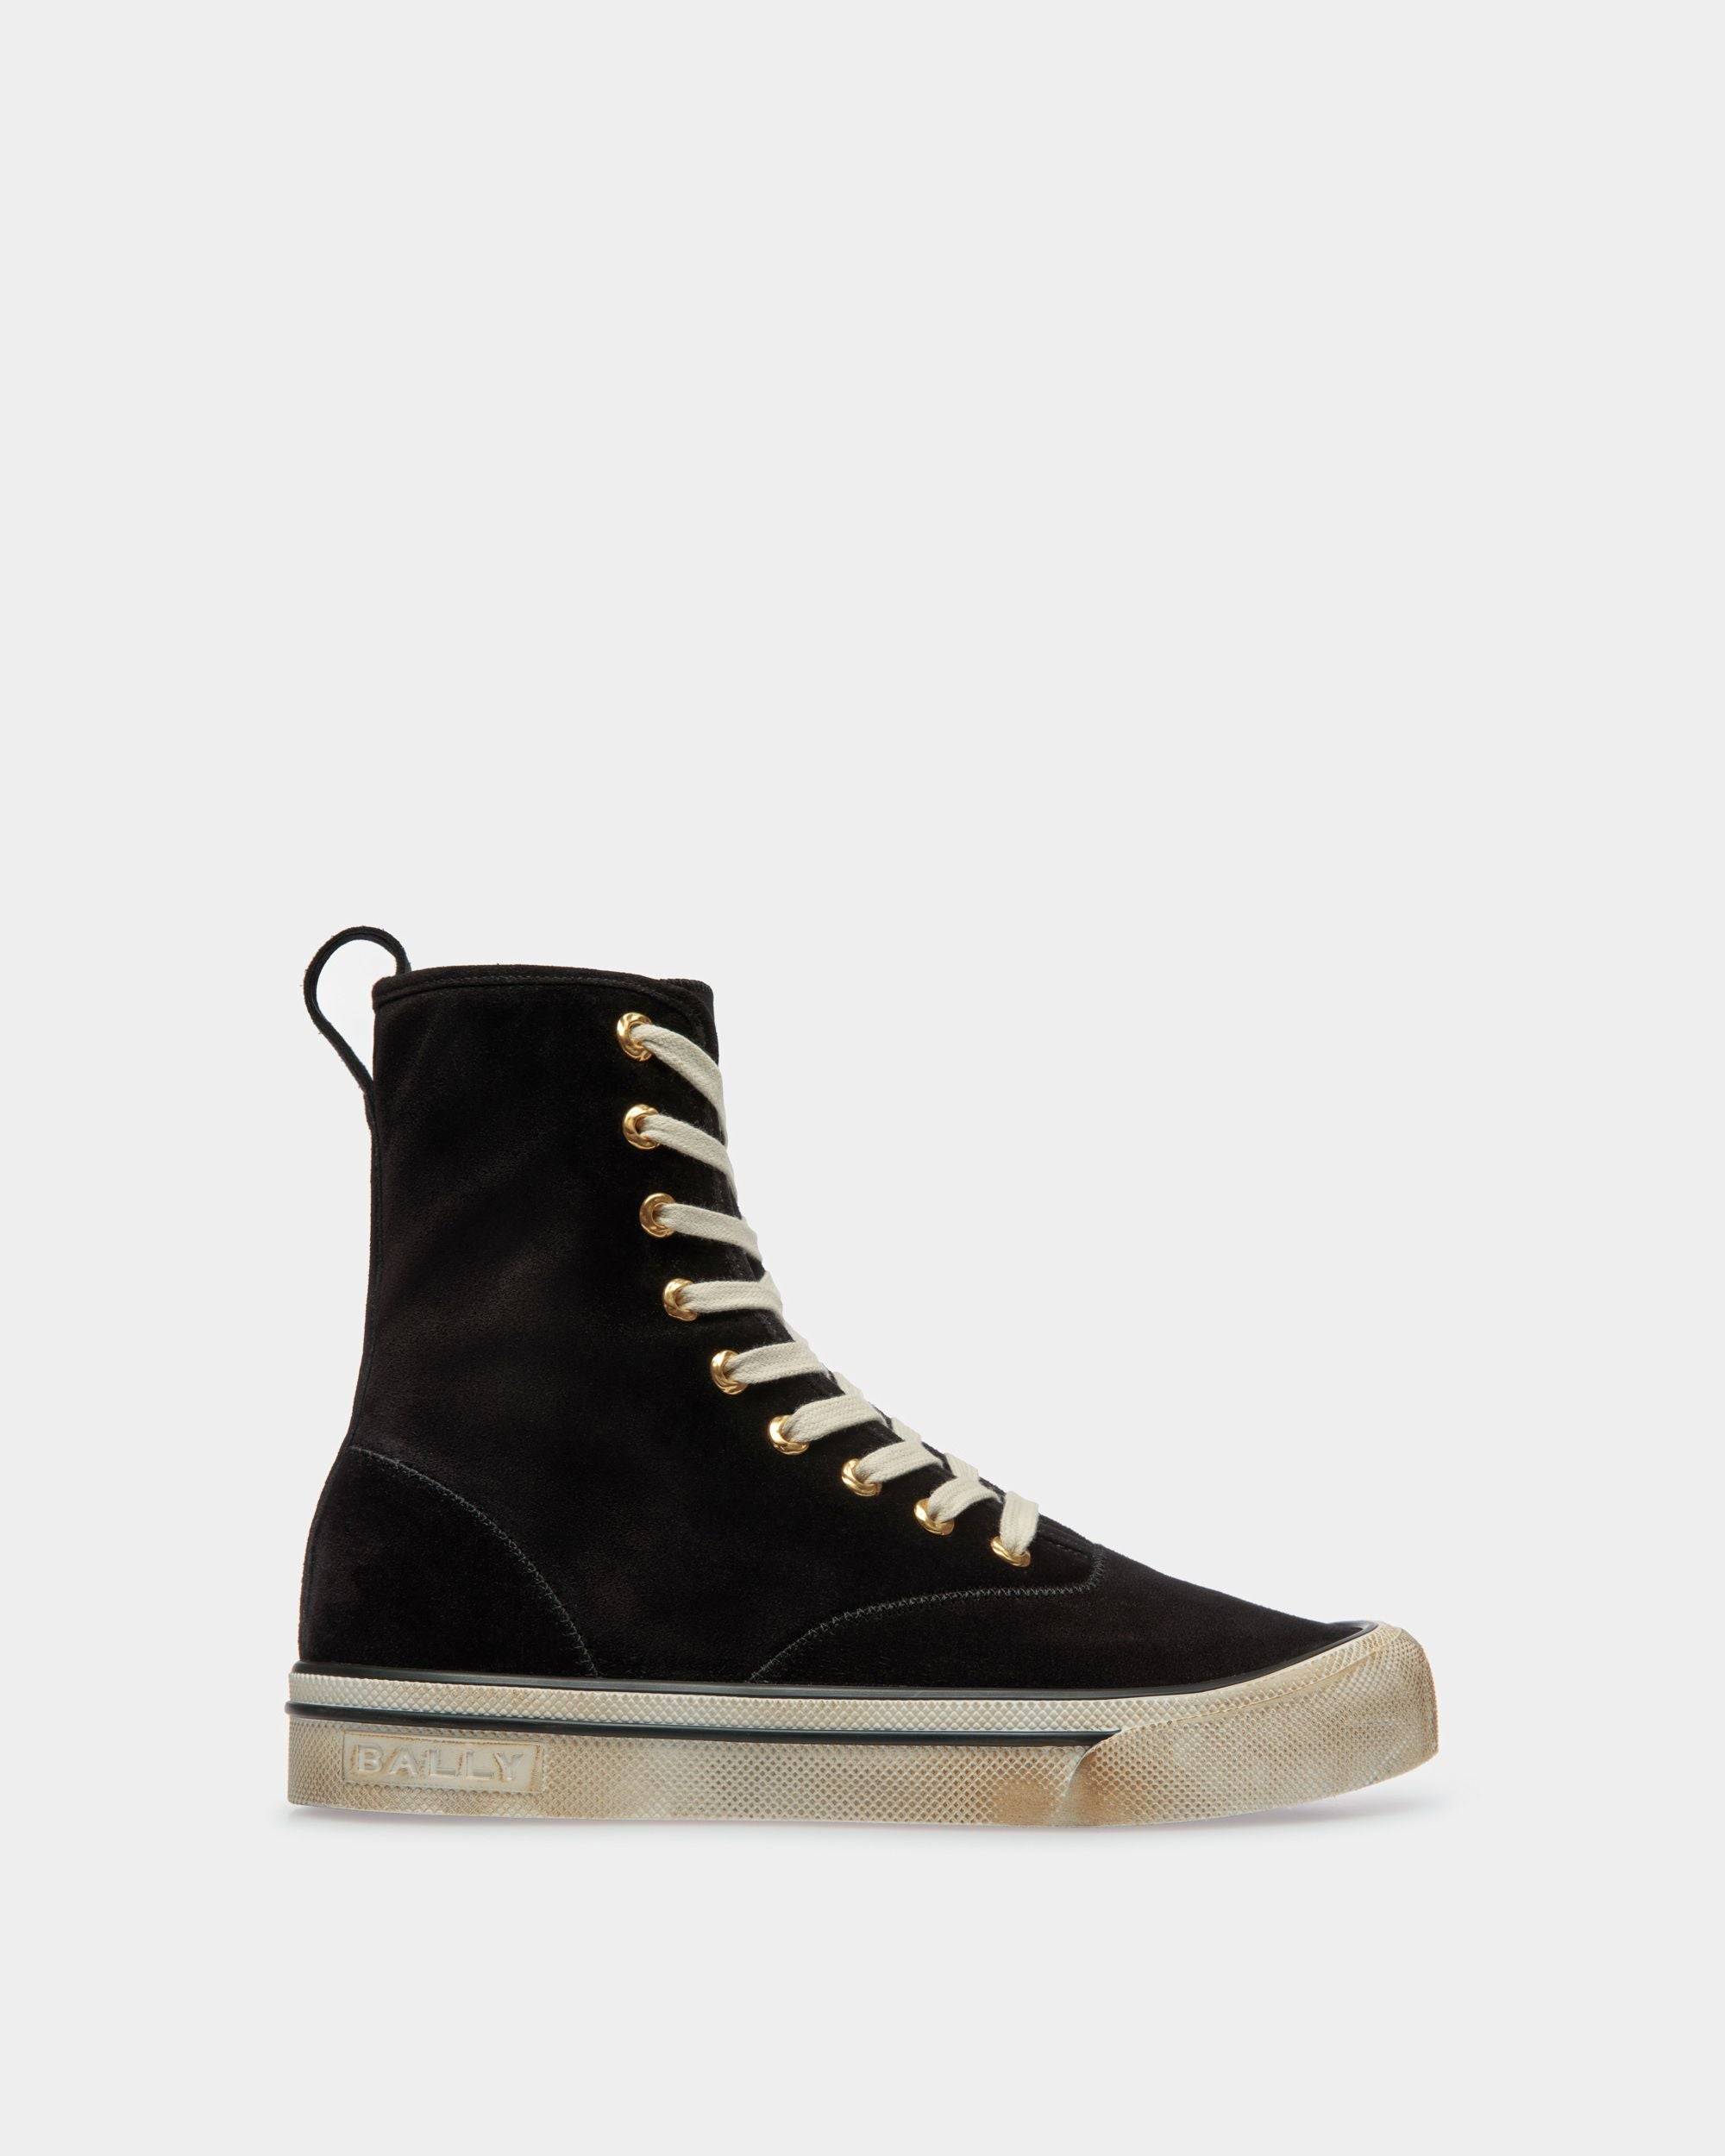 Men's Santa Ana High Top Sneakers In Black Suede | Bally | Still Life Side